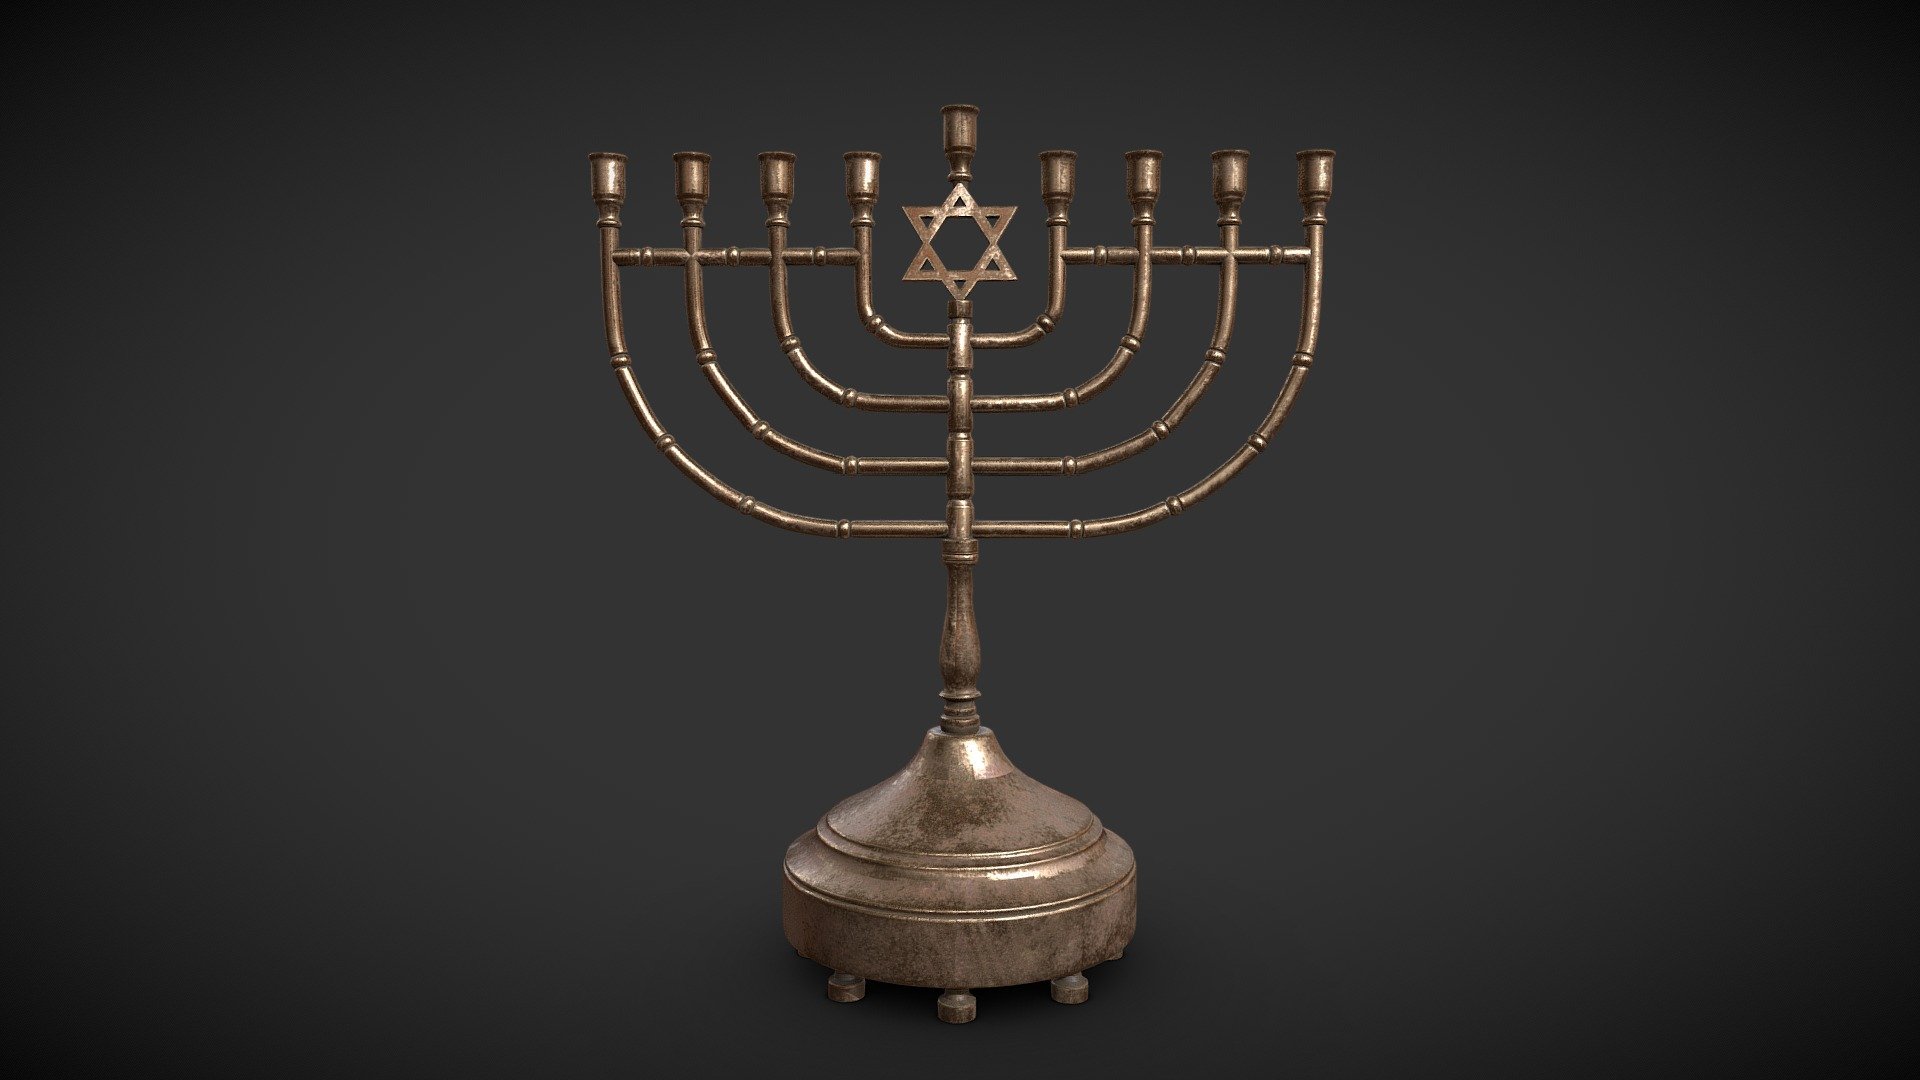 The Chanukiah (sometimes called a menorah) is the nine-branched candelabrum that is used on Chanukah.

This download contains a blender file, FBX, OBJ and DAE. It includes PBR materials for any 3D modelling/Animation software such as Blender, Maya, C4d, 3ds Max, etc. The PBR materials have also been converted so it is compatible with both Unity and Unreal Engine 4/5.

Thank you for choosing this product 3d model